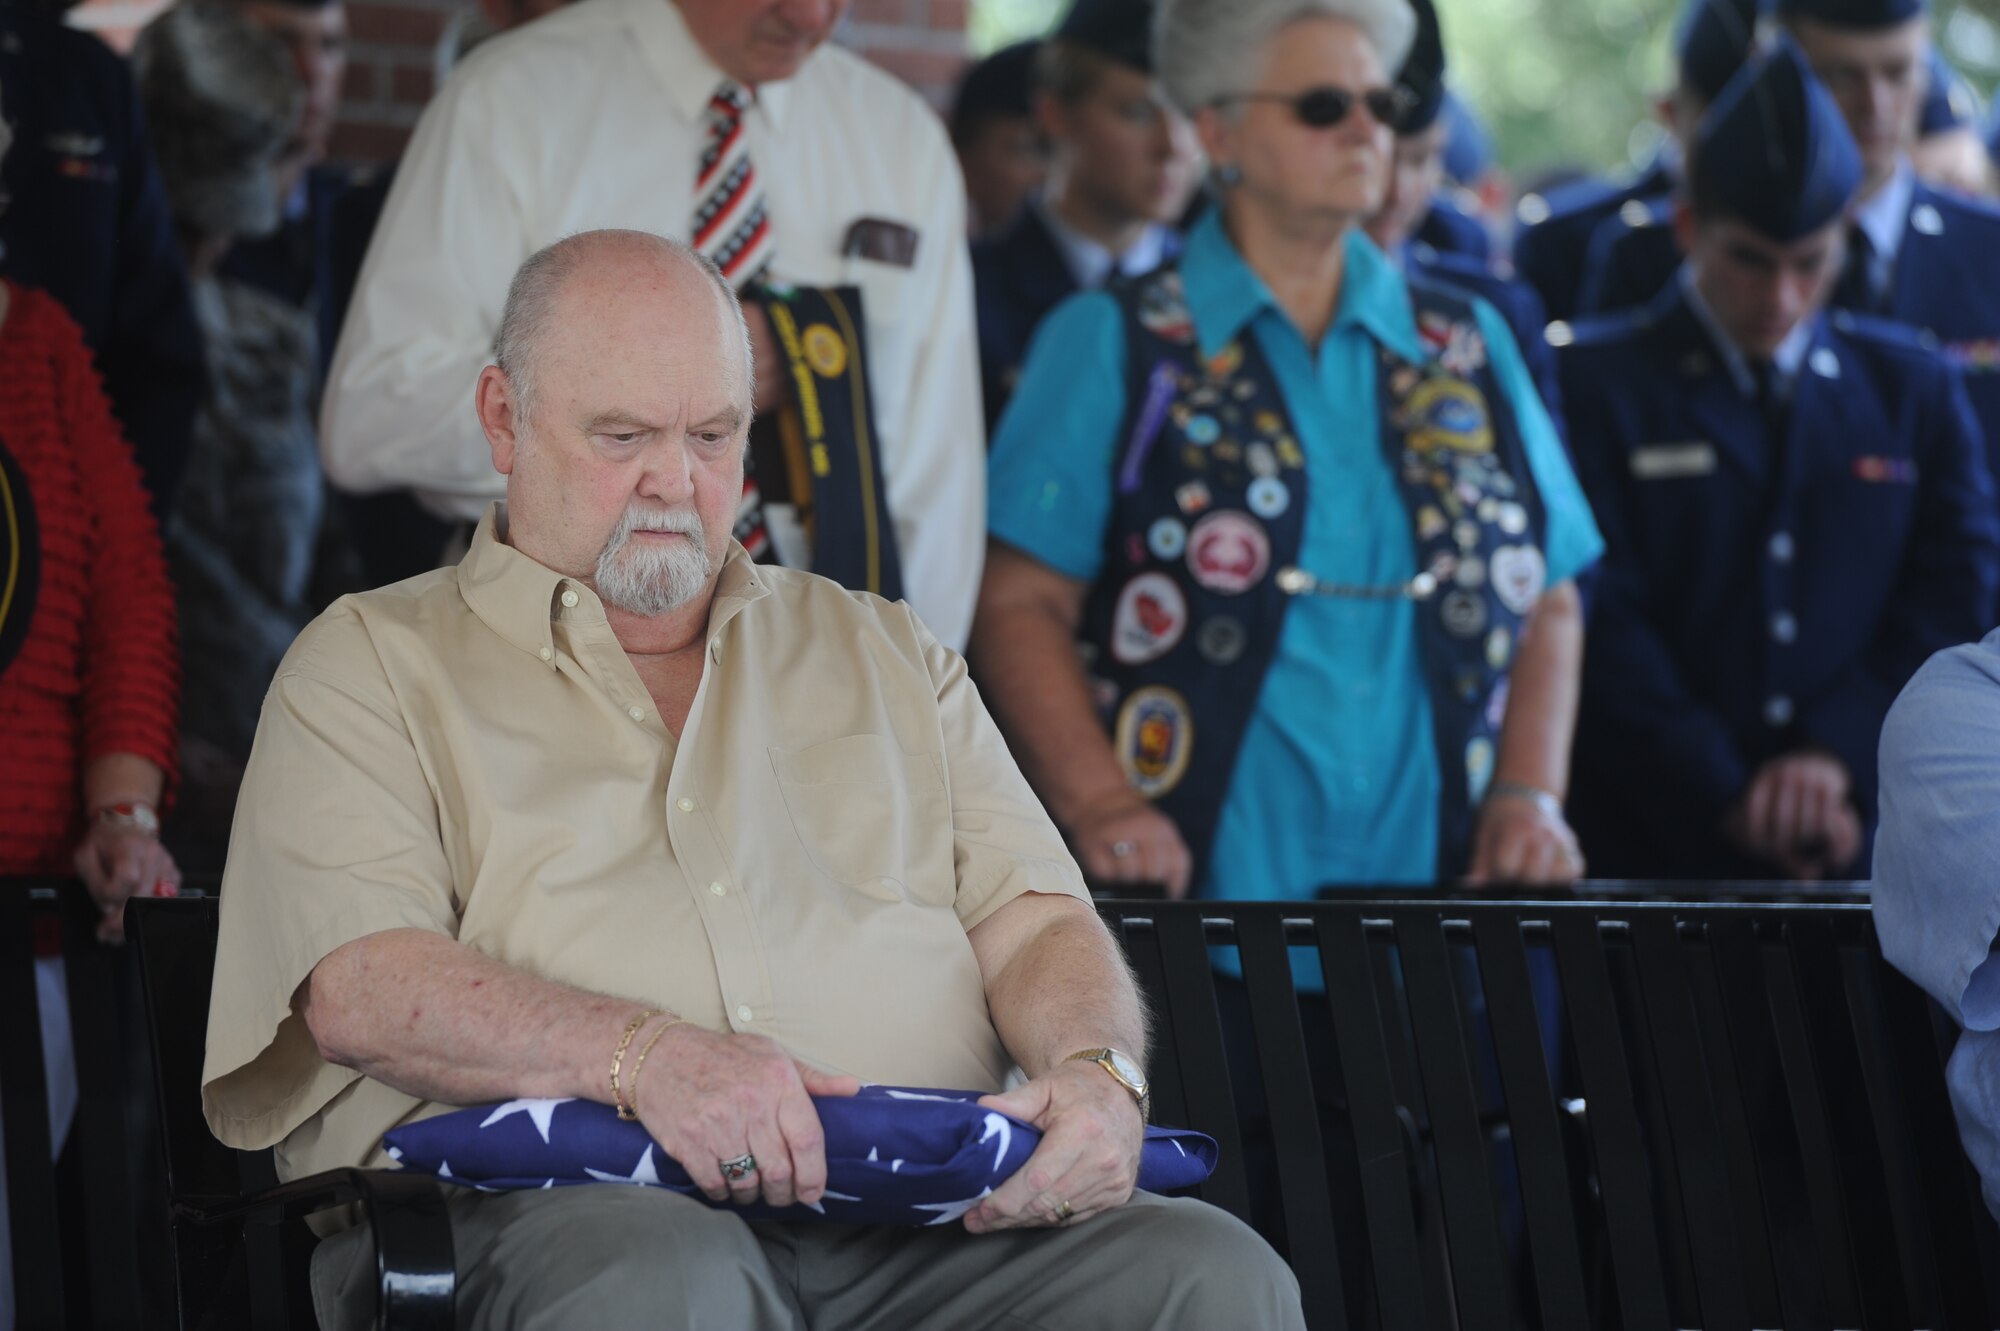 Max C. Peck, Jr., holds the memorial flag for the Forgotten Hero ceremony of Maj. Pierre David Junod, Aug. 28, 2014, at Biloxi National Cemetery. Peck, a fellow parishioner of the Nourishing Place chapel, was Junod’s closest friend. Junod was a U.S. Air Force navigator during the Vietnam War.  (U.S. Air Force photo by Airman 1st Class Stephan Coleman)